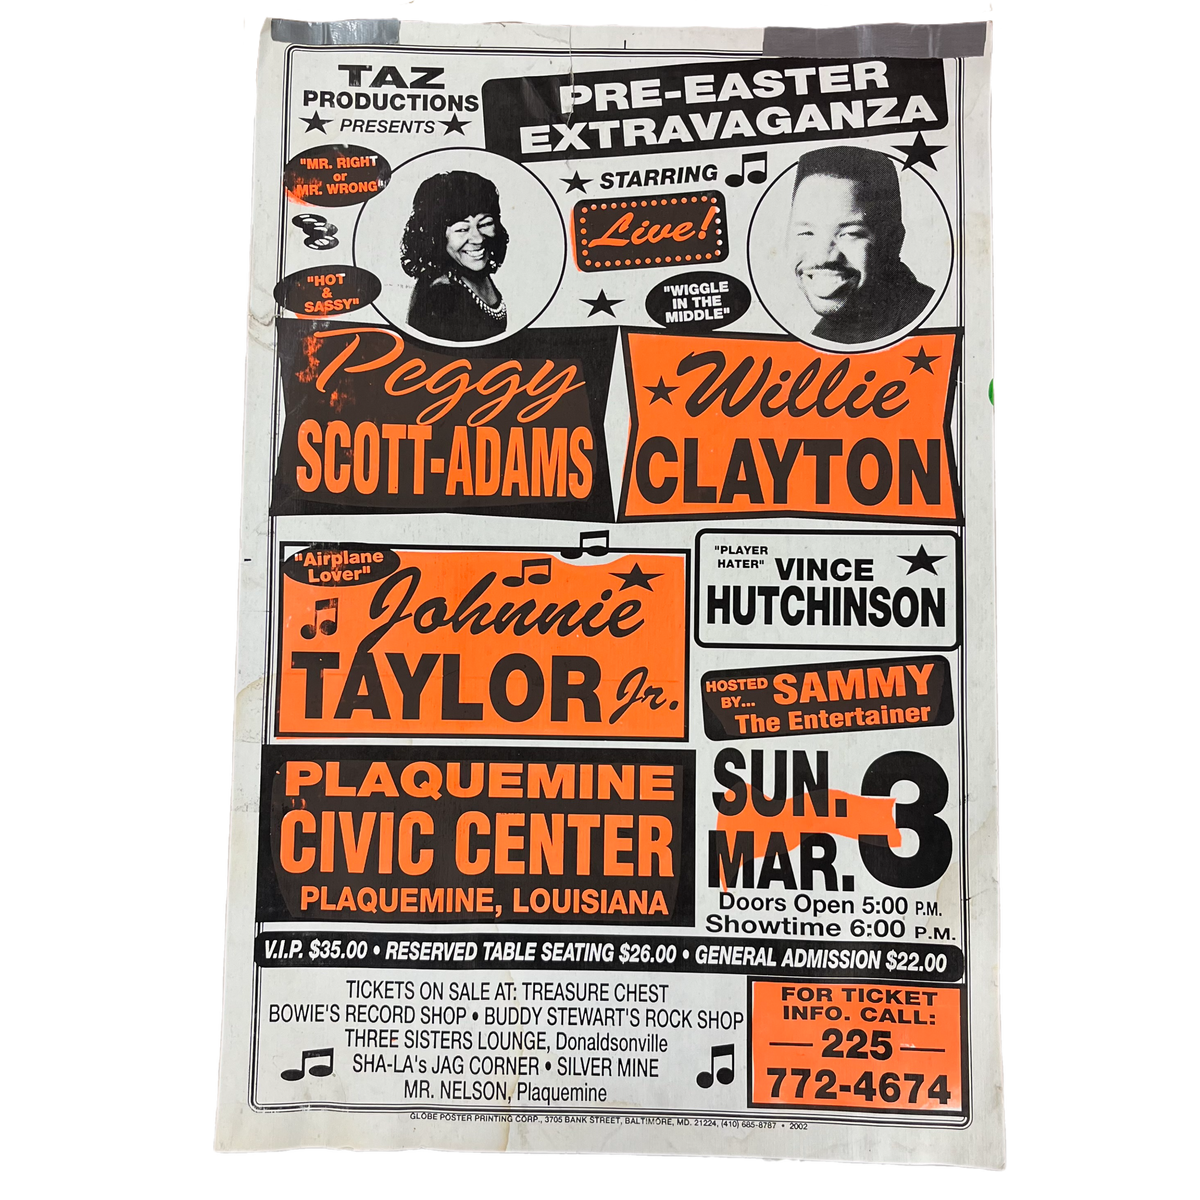 Vintage Pre-Easter Extravaganza Peggy Scott Adams Willie Clayton Johnnie Taylor Vince Hutchinson &quot;Globe Poster Printing Corp&quot; Show Poster